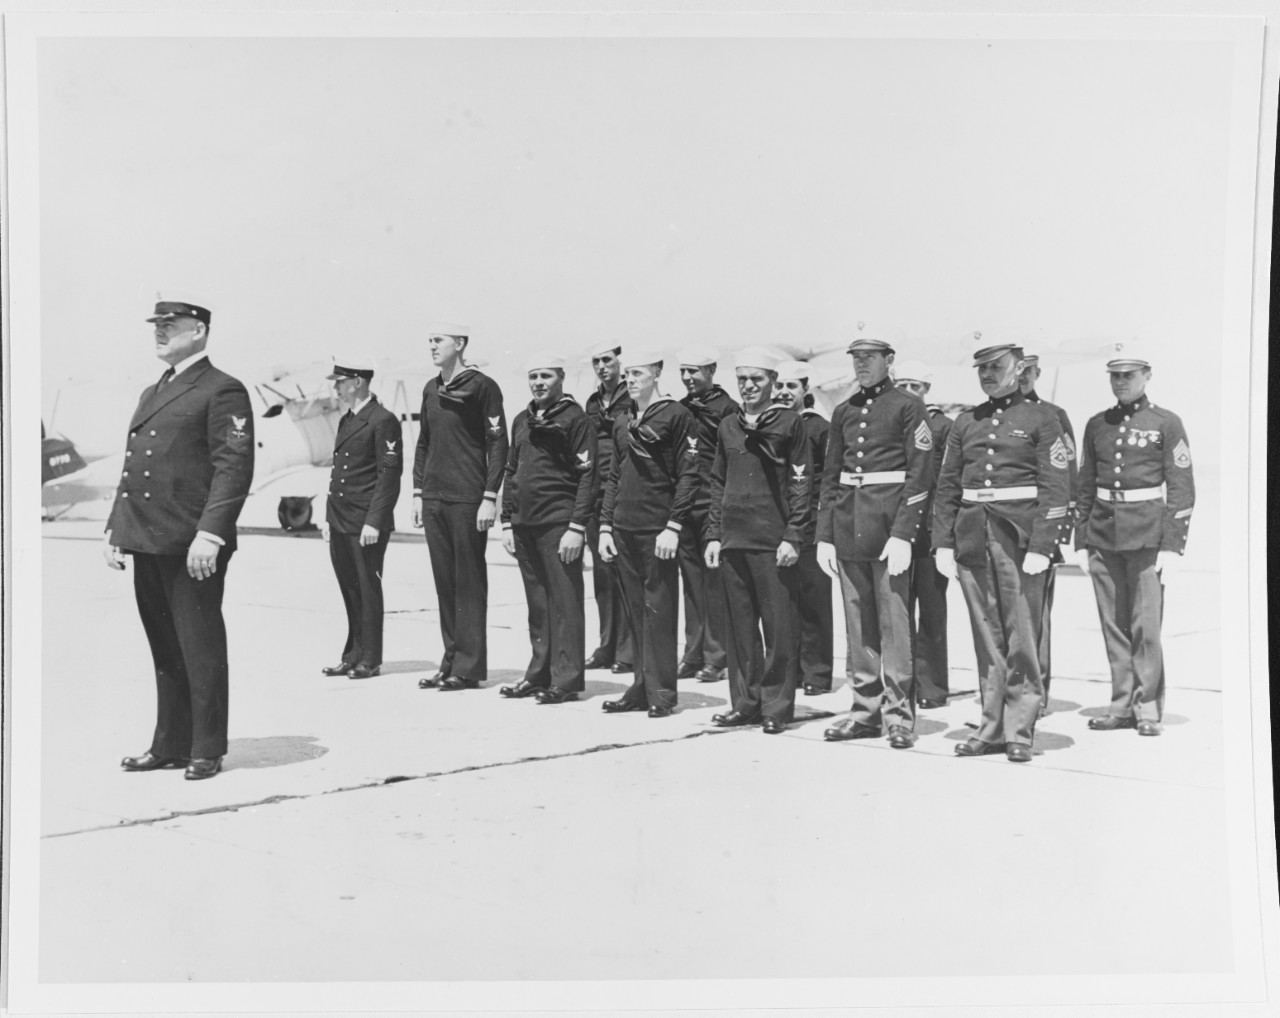 The regular navy station keepers at the Naval Reserve Air Base at Floyd Bennett Field, New York.